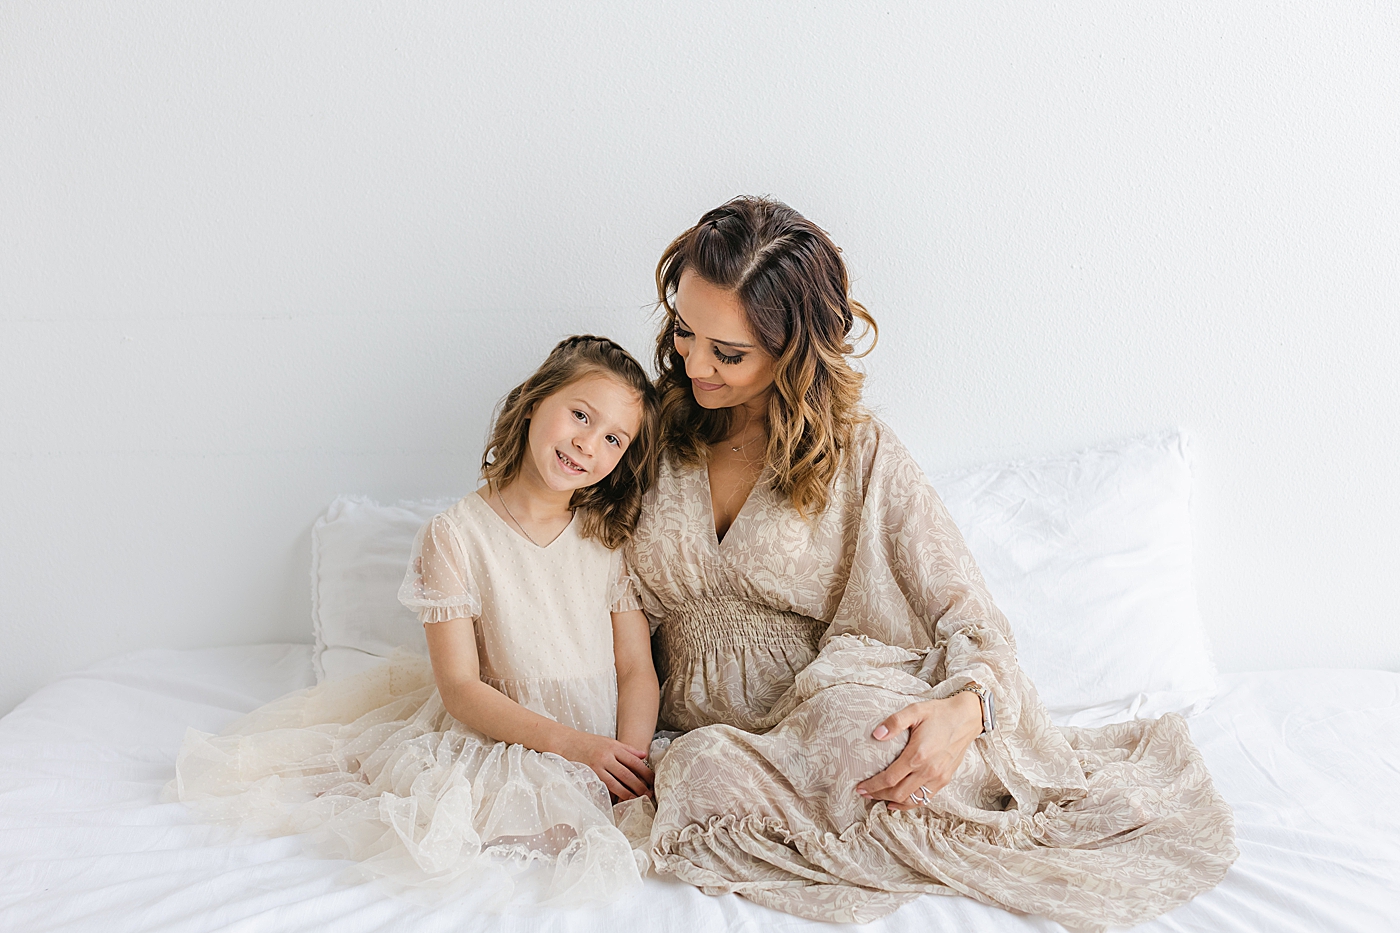 Mom and daughter sitting together on a white bed | Photo by Sana Ahmed Photography